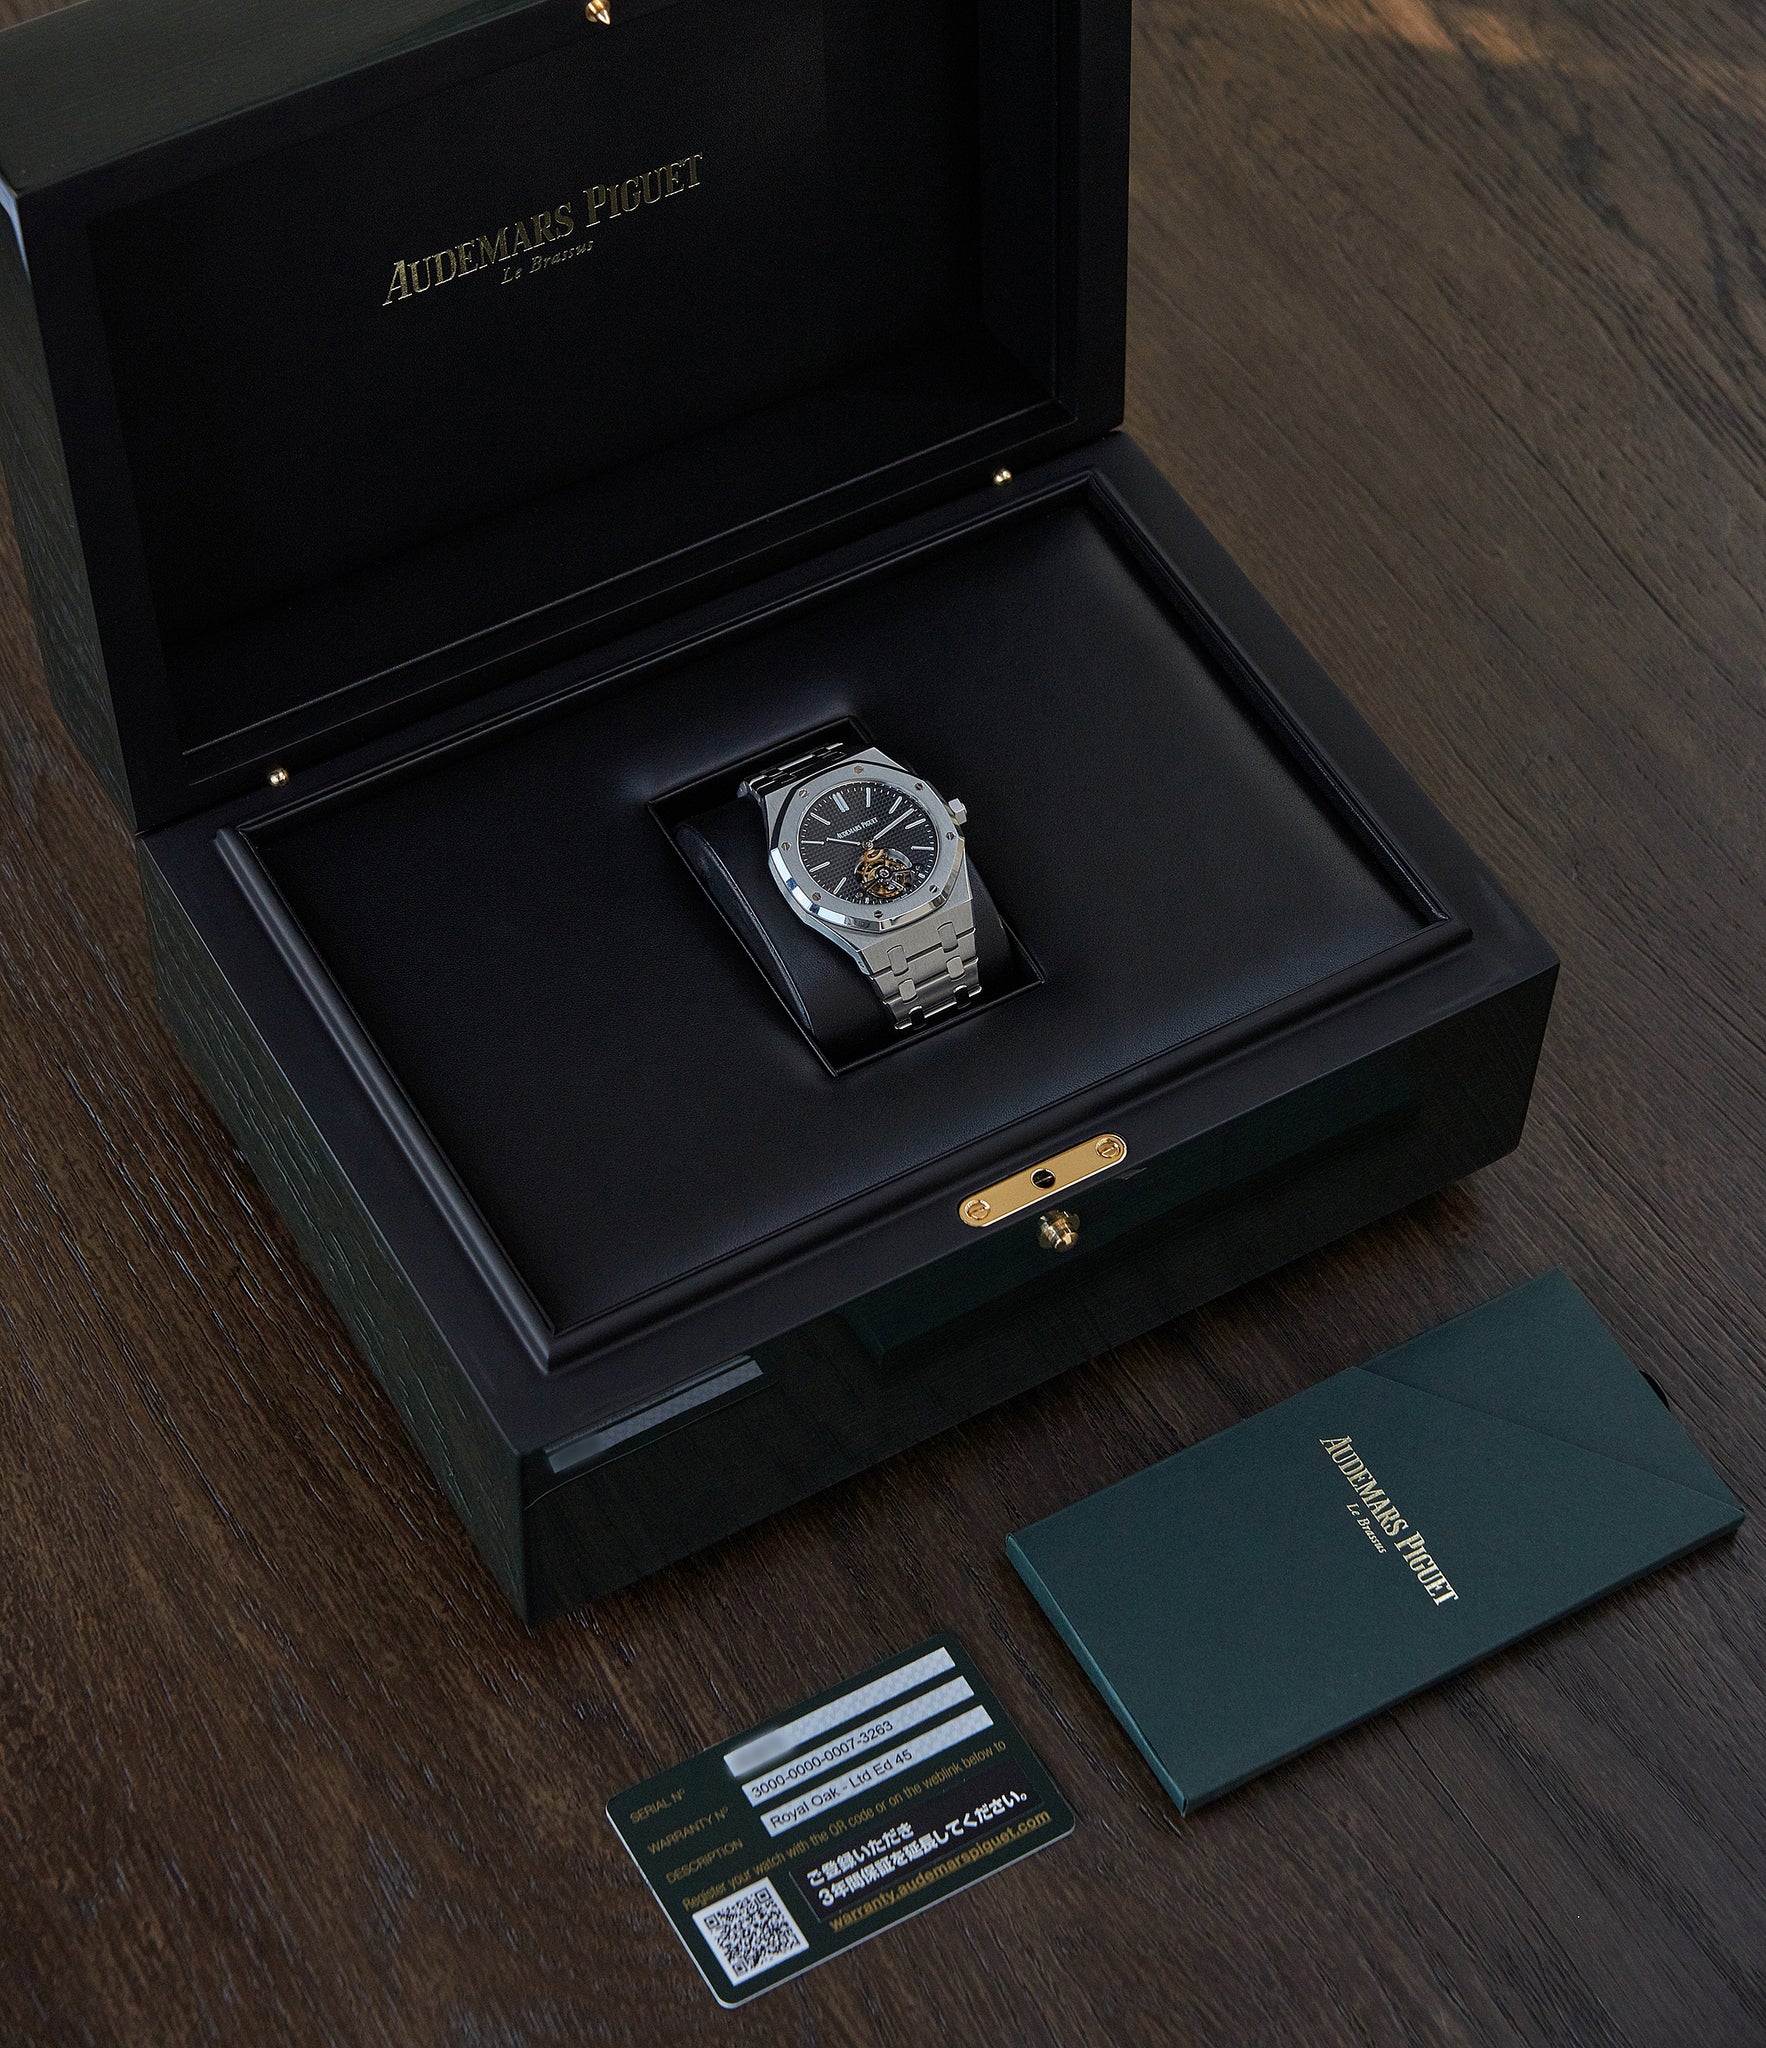 Full set Audemars Piguet Royal Oak Tourbillon extra-slim Special Edition Japanese steel pre-owned watch for sale online at A Collected Man London UK specialist of rare watches